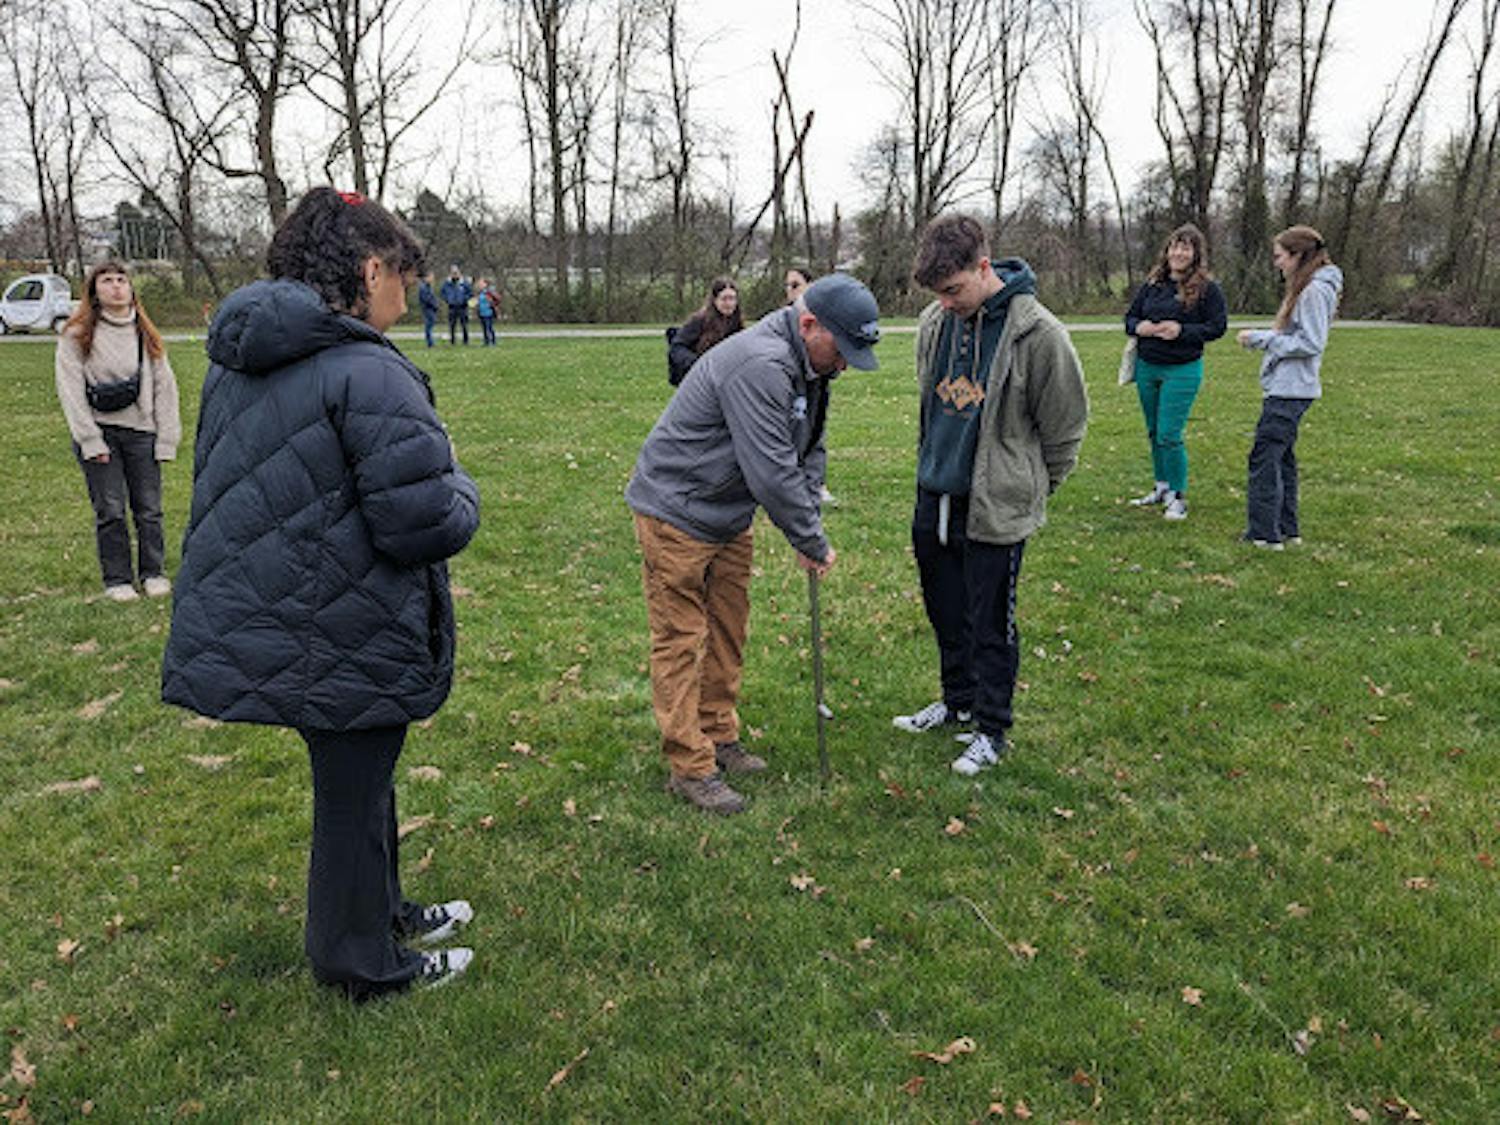 TCNJ Organic Land Management students are taught by Richard McCoy, principal owner of Richard A. McCoy Horticultural Services Inc., to take soil samples off the ground at the pilot location (Photo courtesy of Jenna Needham and Maria Hourihan).